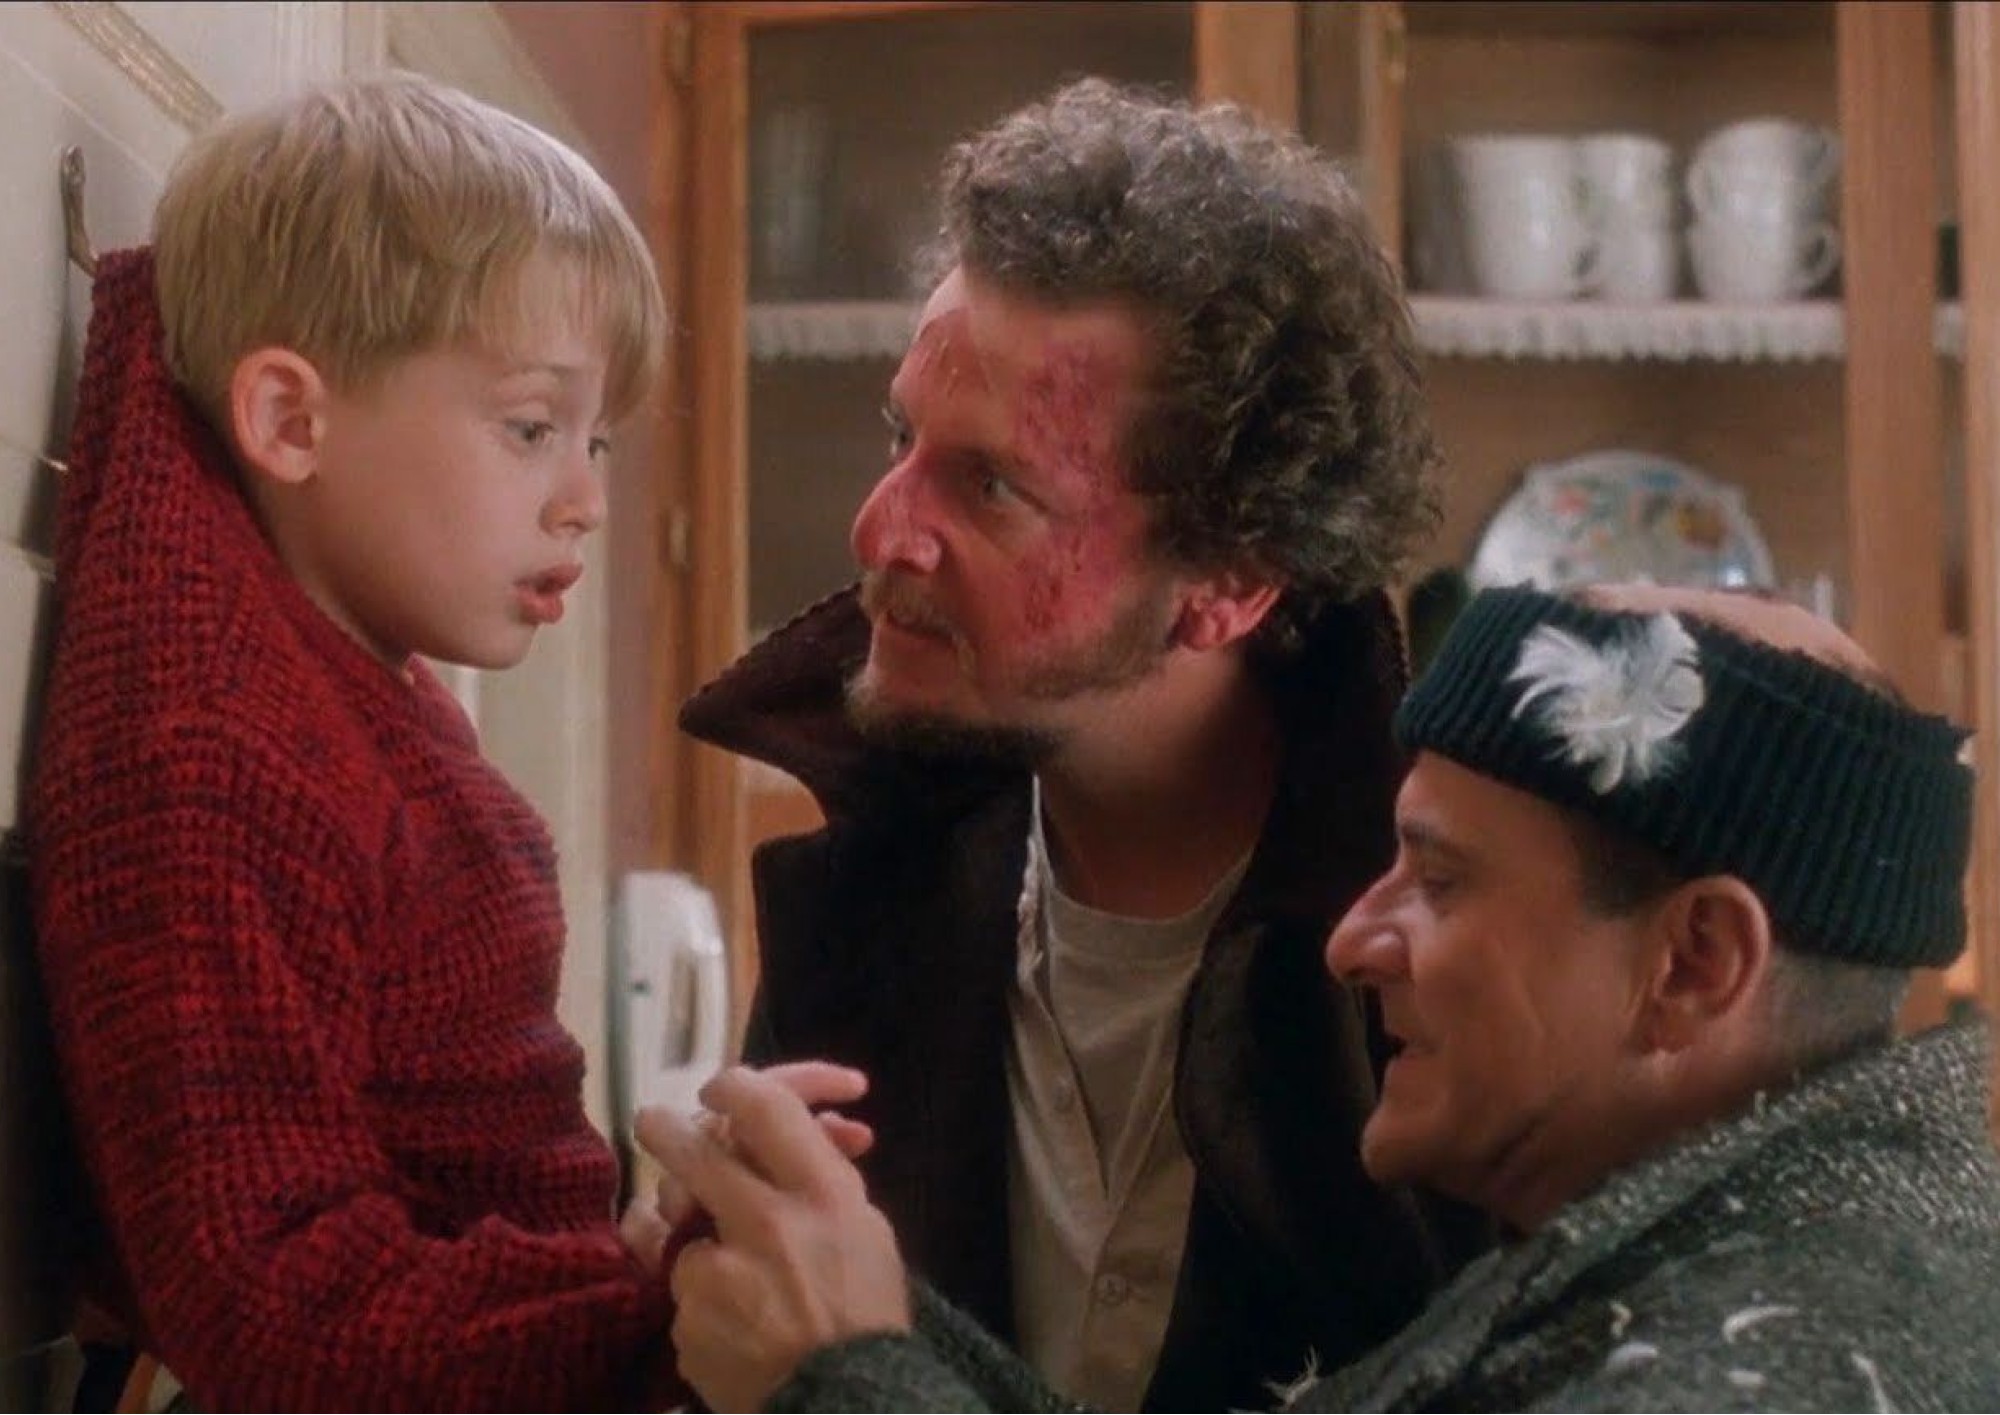 Image from the motion picture Home Alone